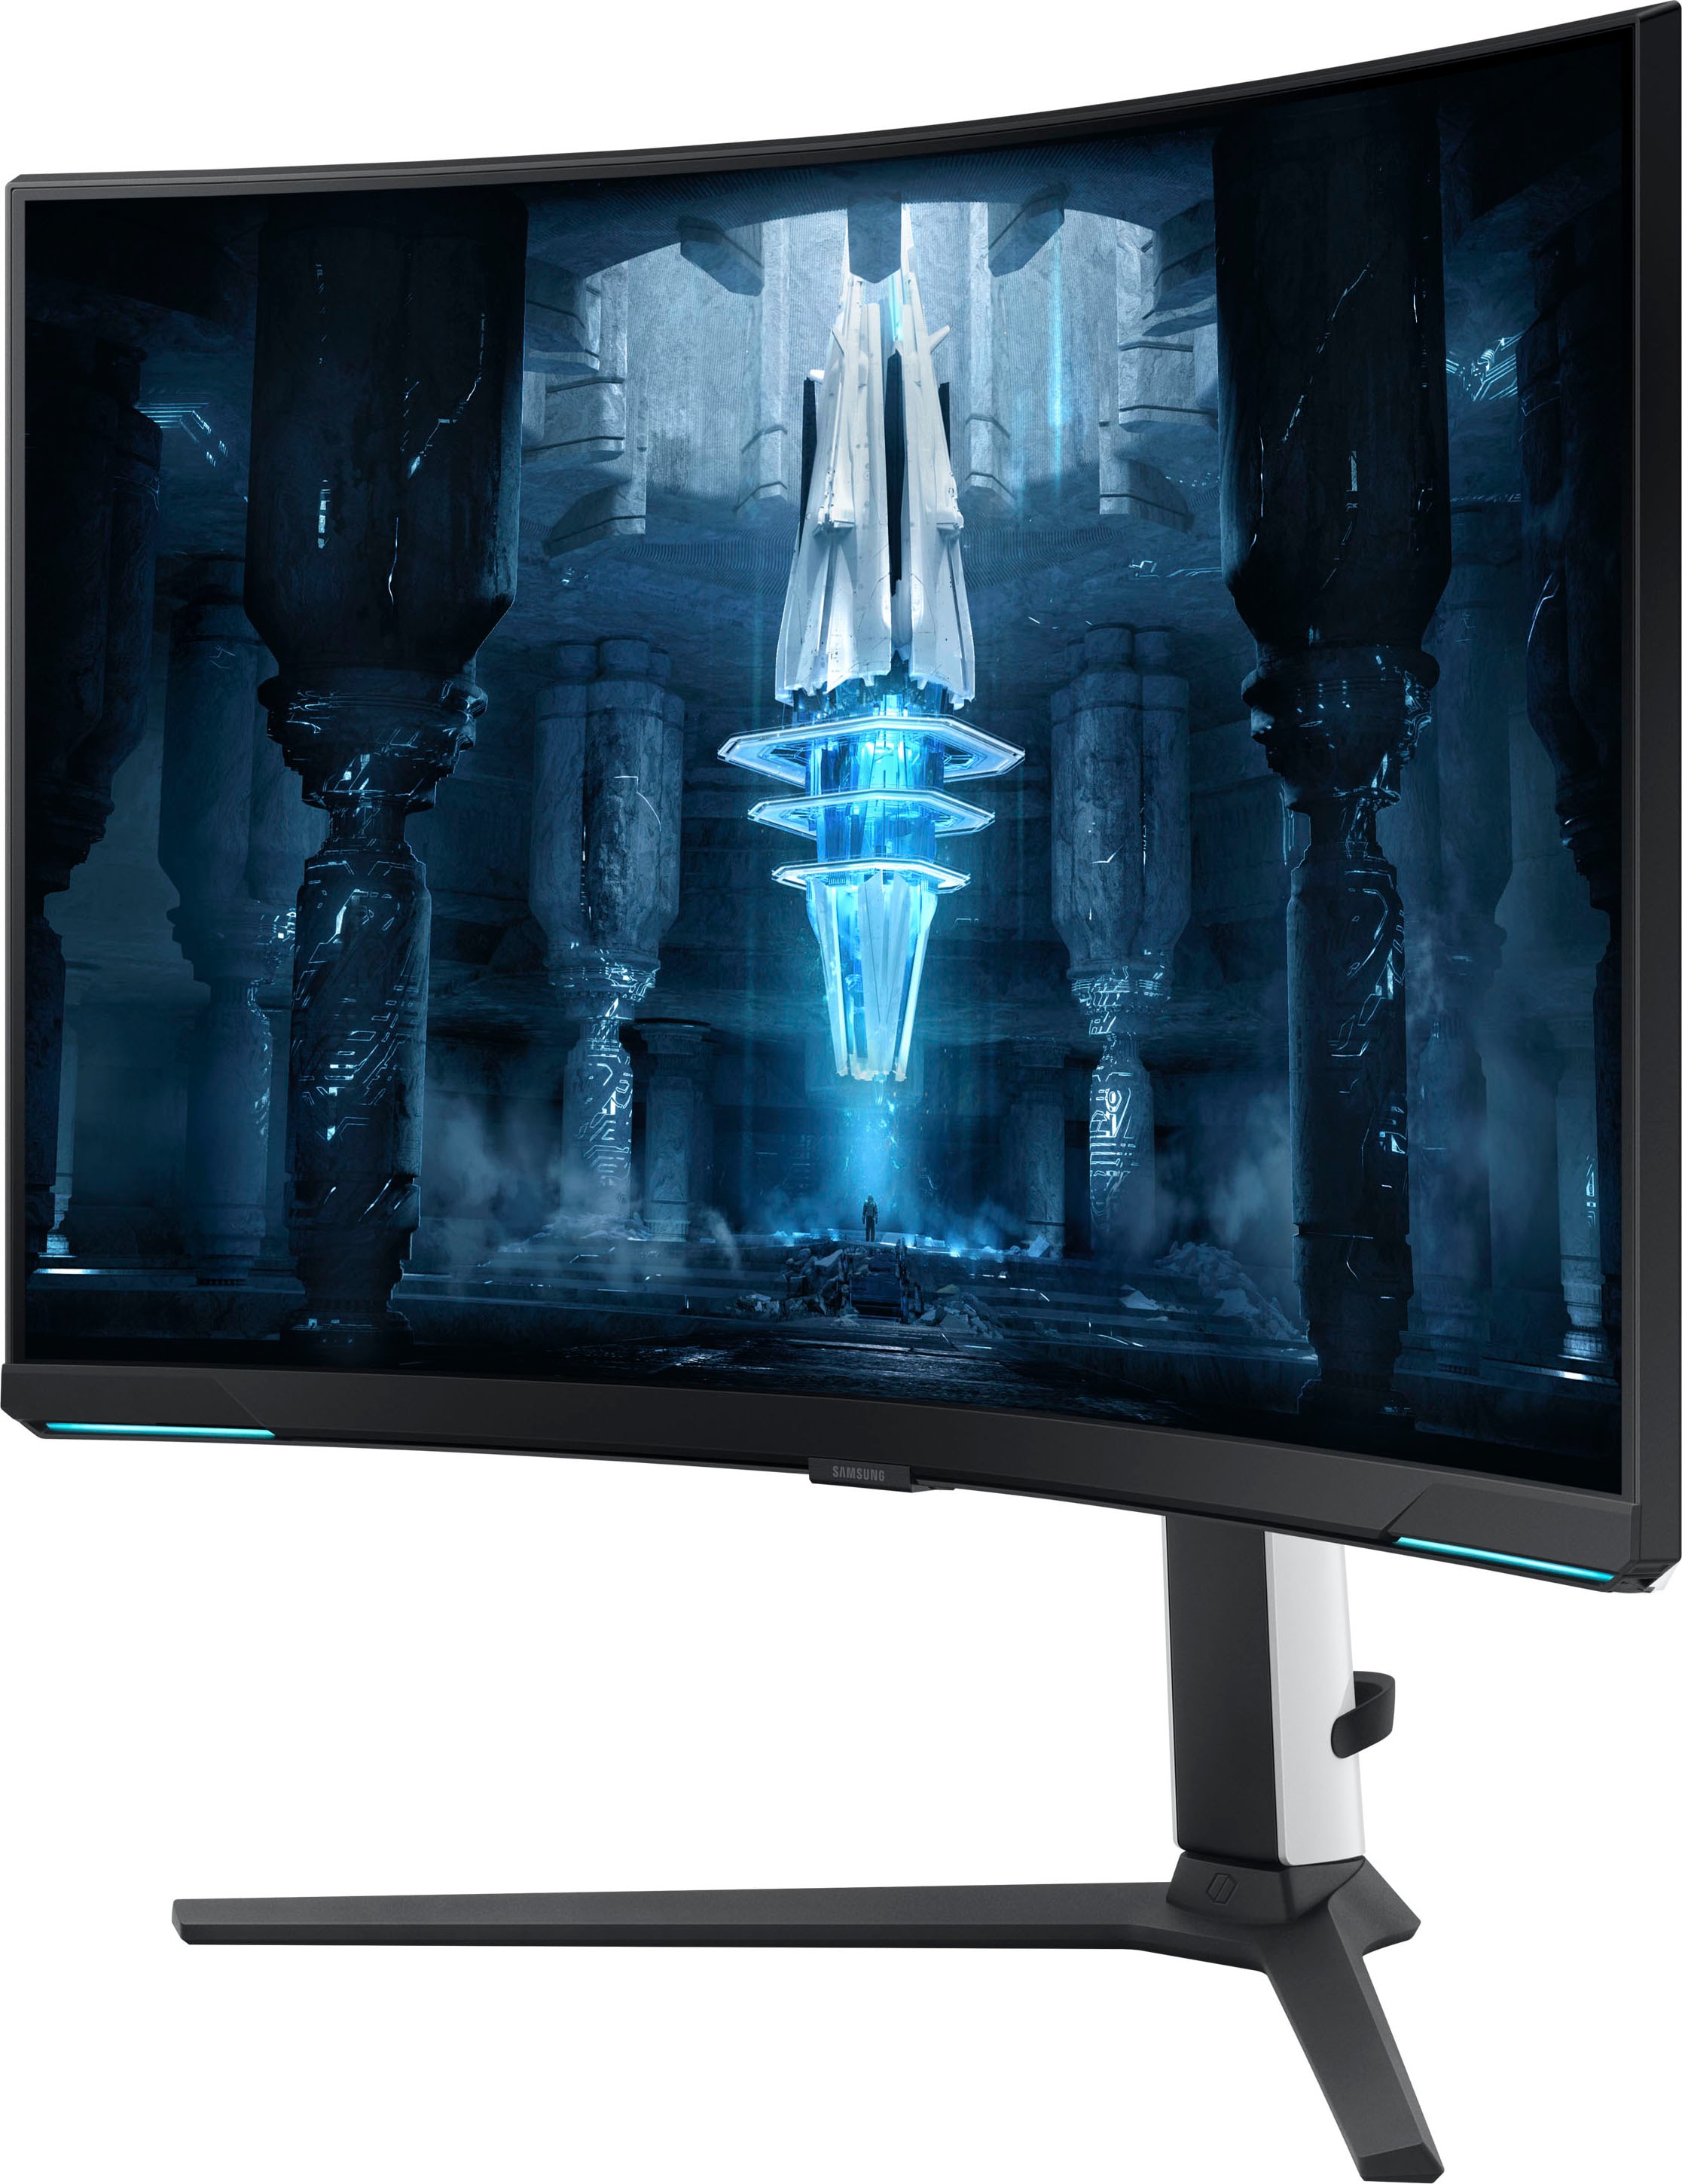 Samsung Curved-Gaming-LED-Monitor »Odyssey Neo G8 S32BG850NP«, 81 cm/32  Zoll, 3840 x 2160 px, 4K Ultra HD, 1 ms Reaktionszeit, 165 Hz, 1ms (G/G)  bei OTTO